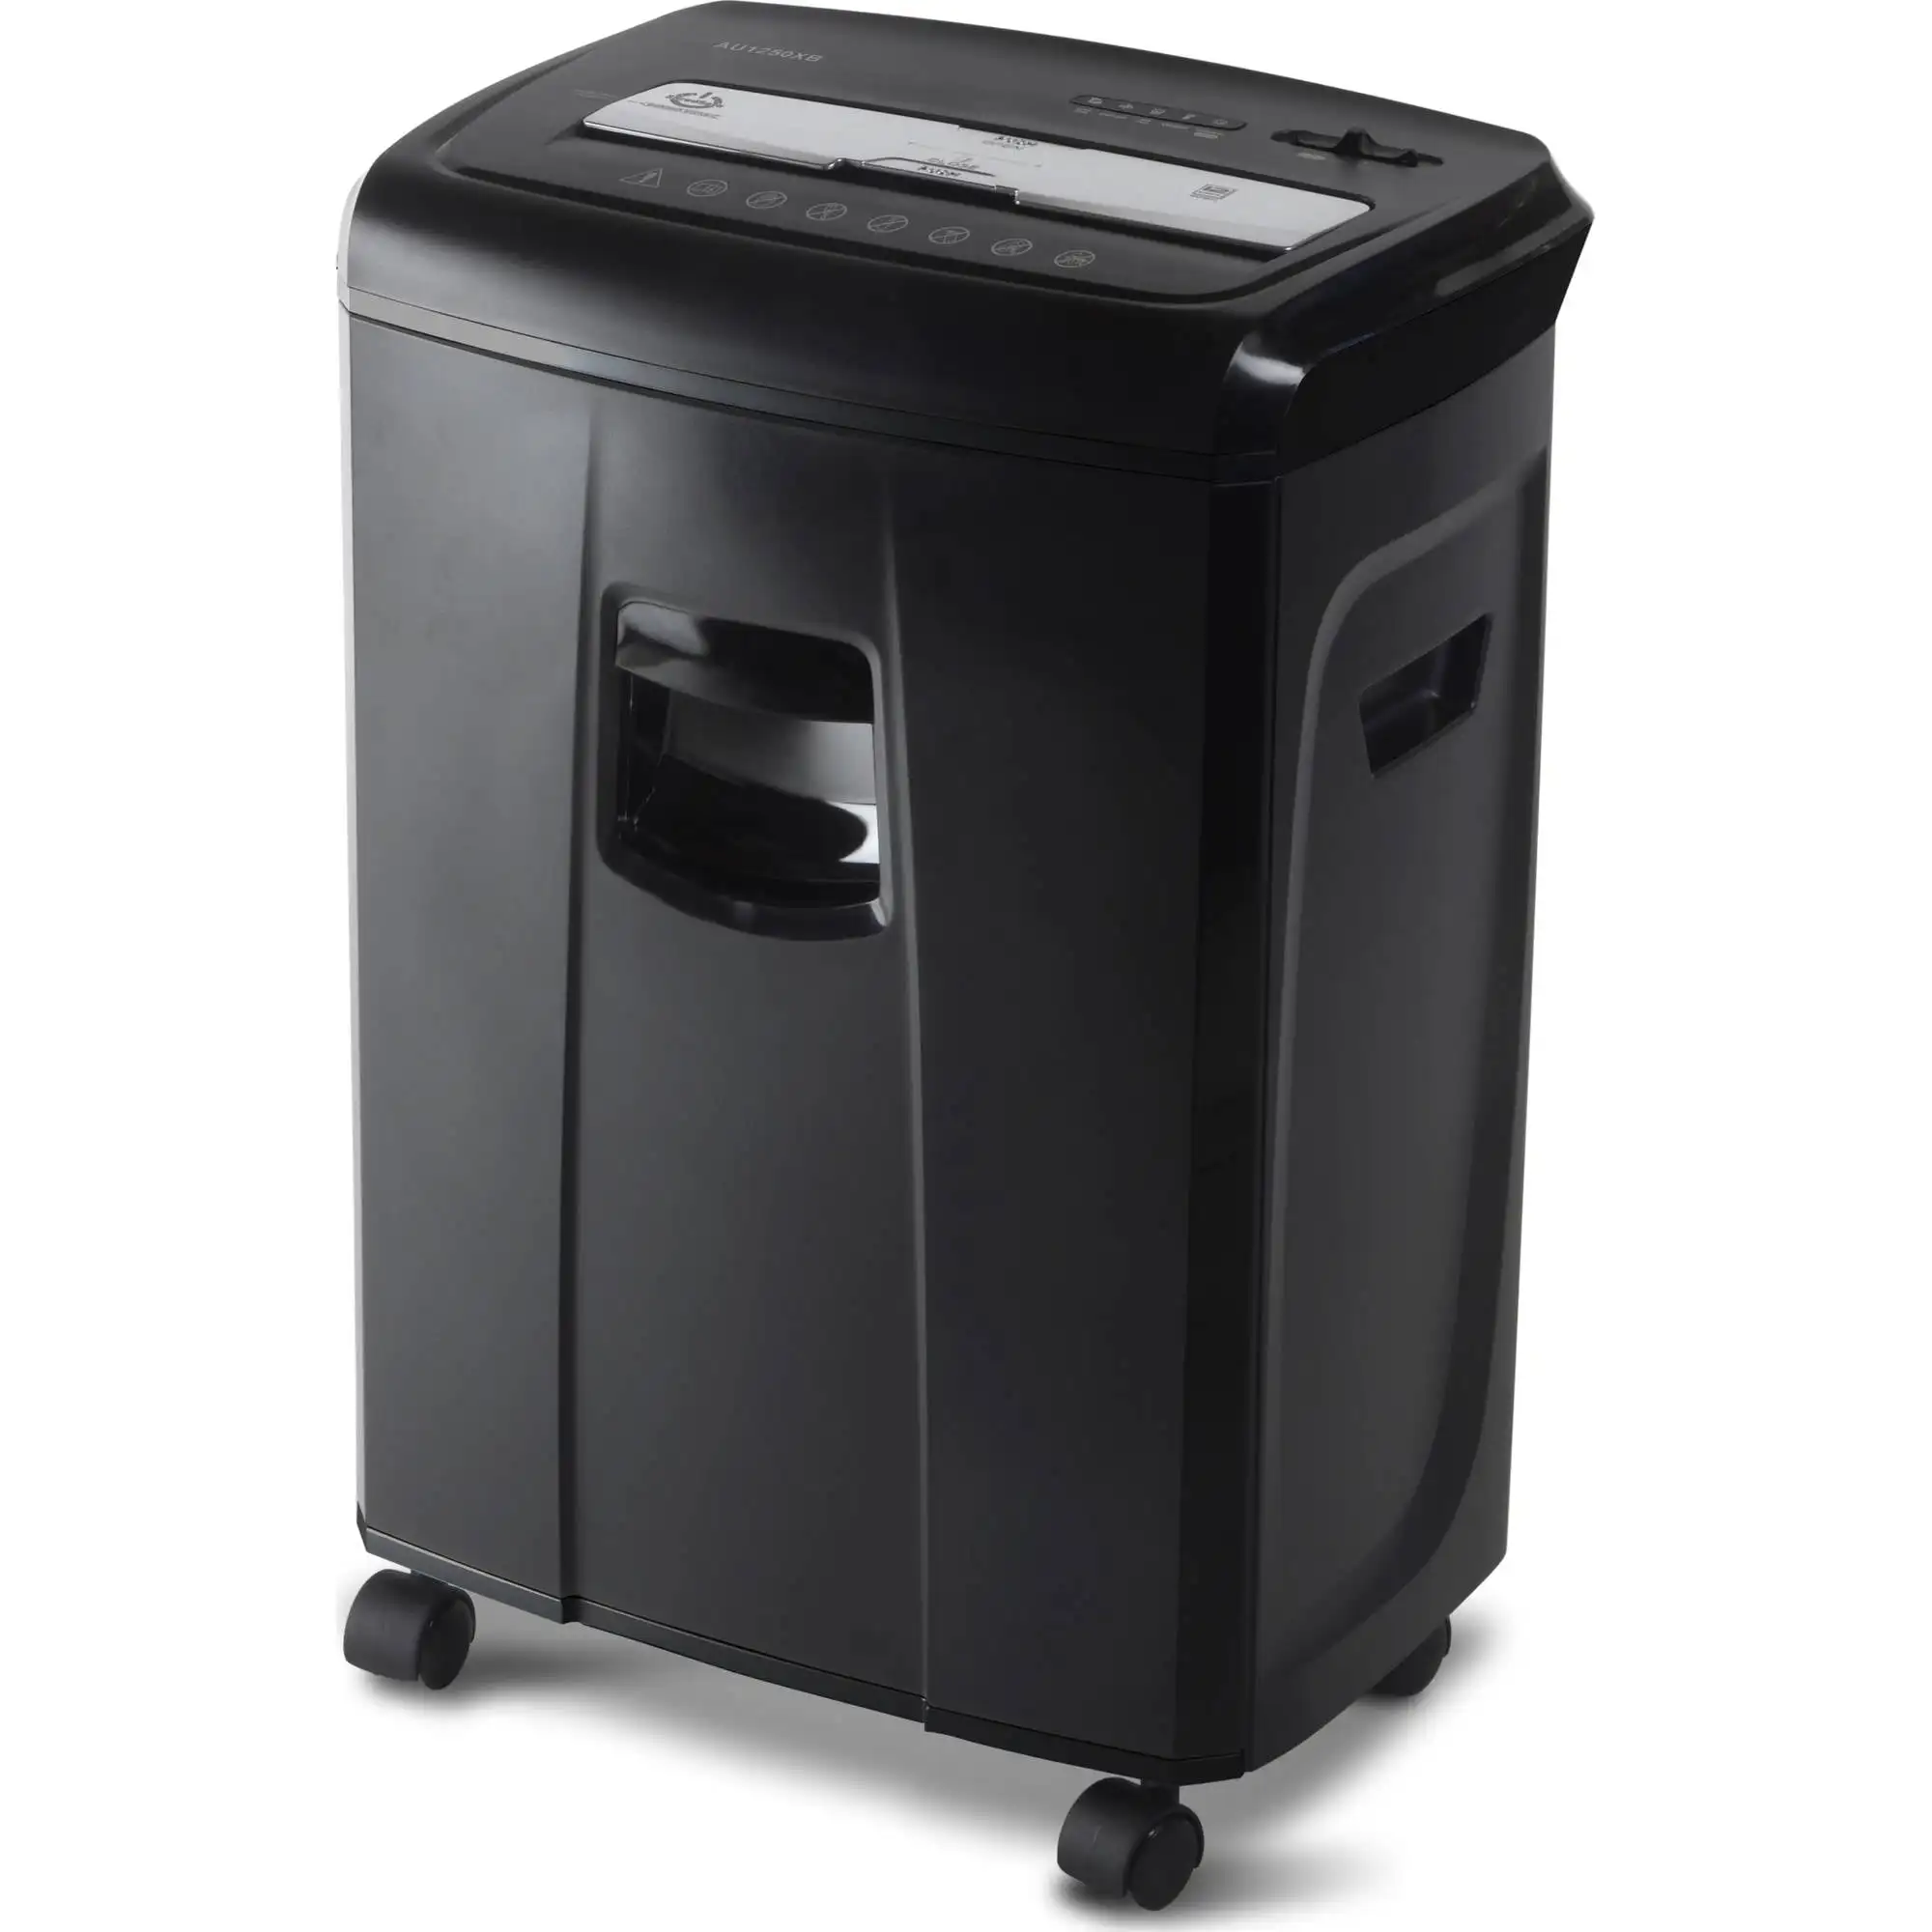 

12-Sheet Crosscut Paper and Credit Card Shredder with Pullout Basket